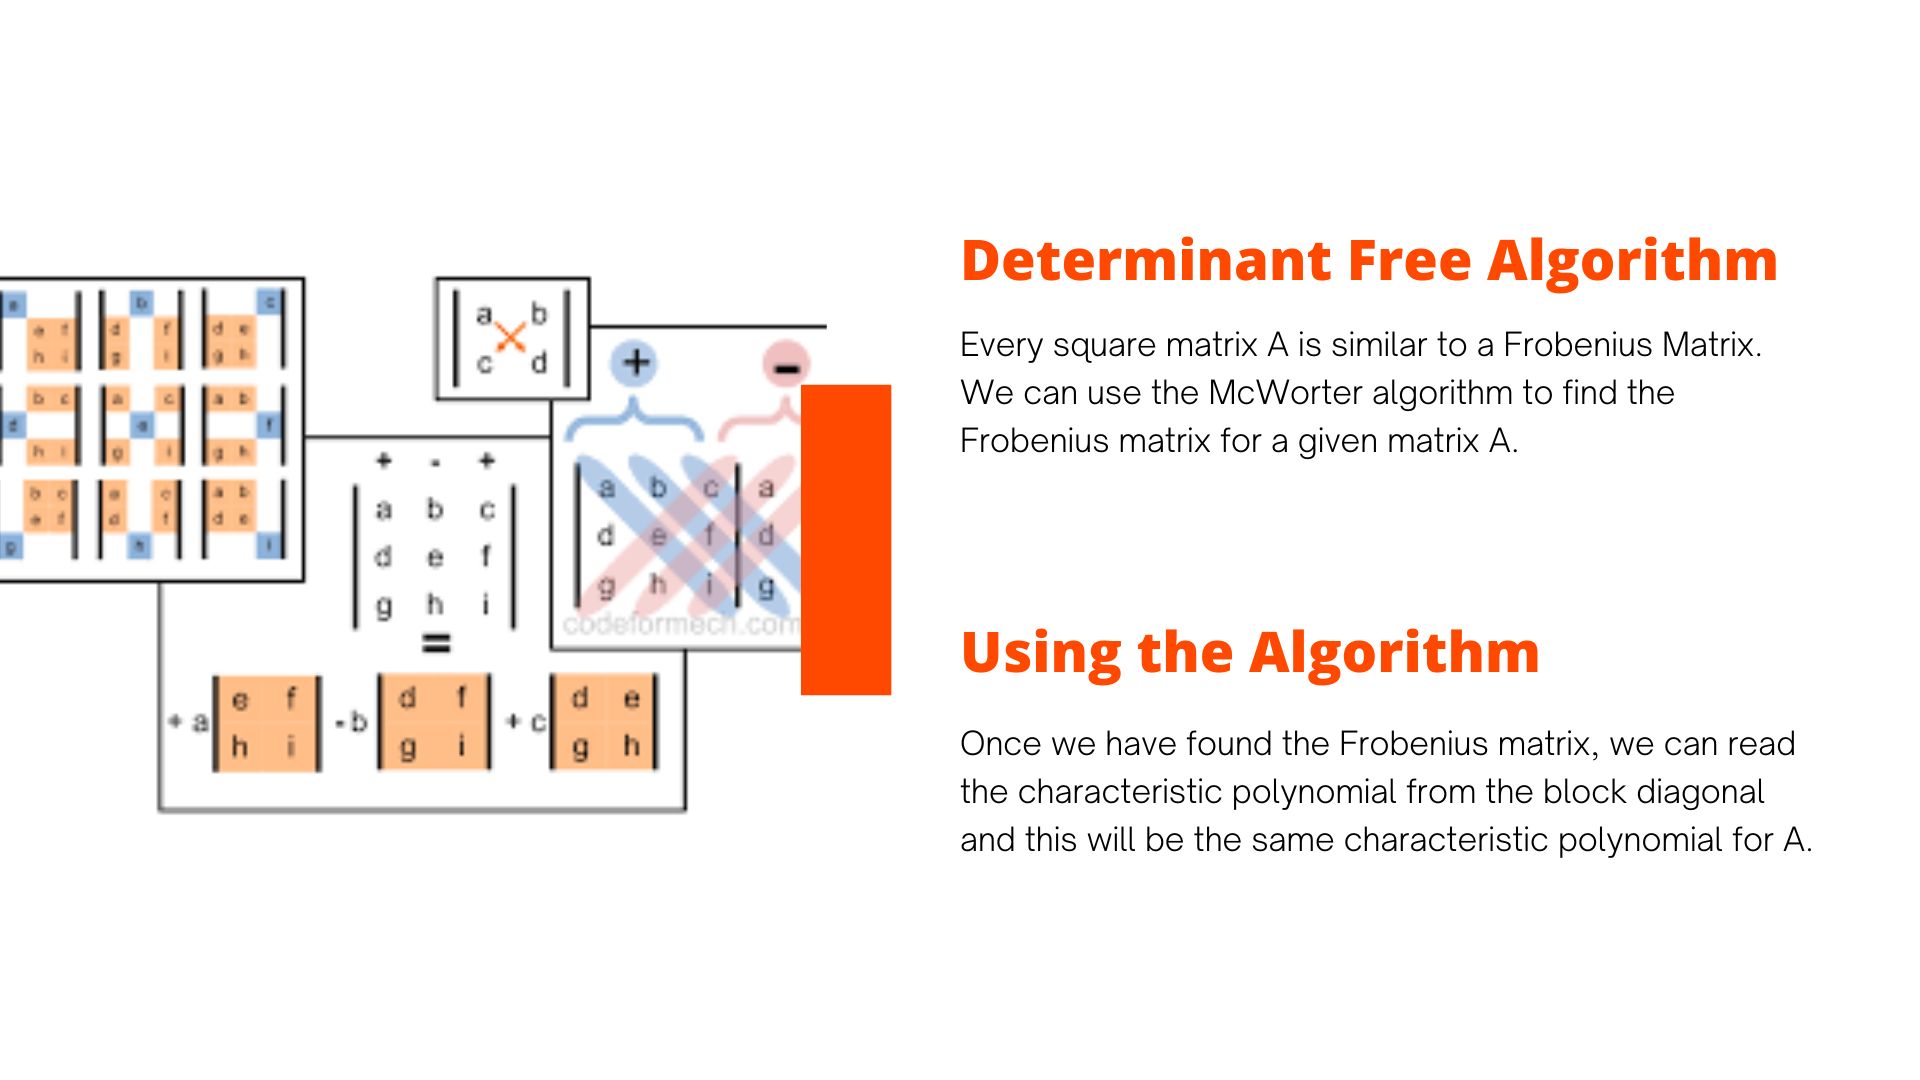 Death to Determinants presentation slide on using an algorithm of Dr. William McWorter, images feature matrices in orange